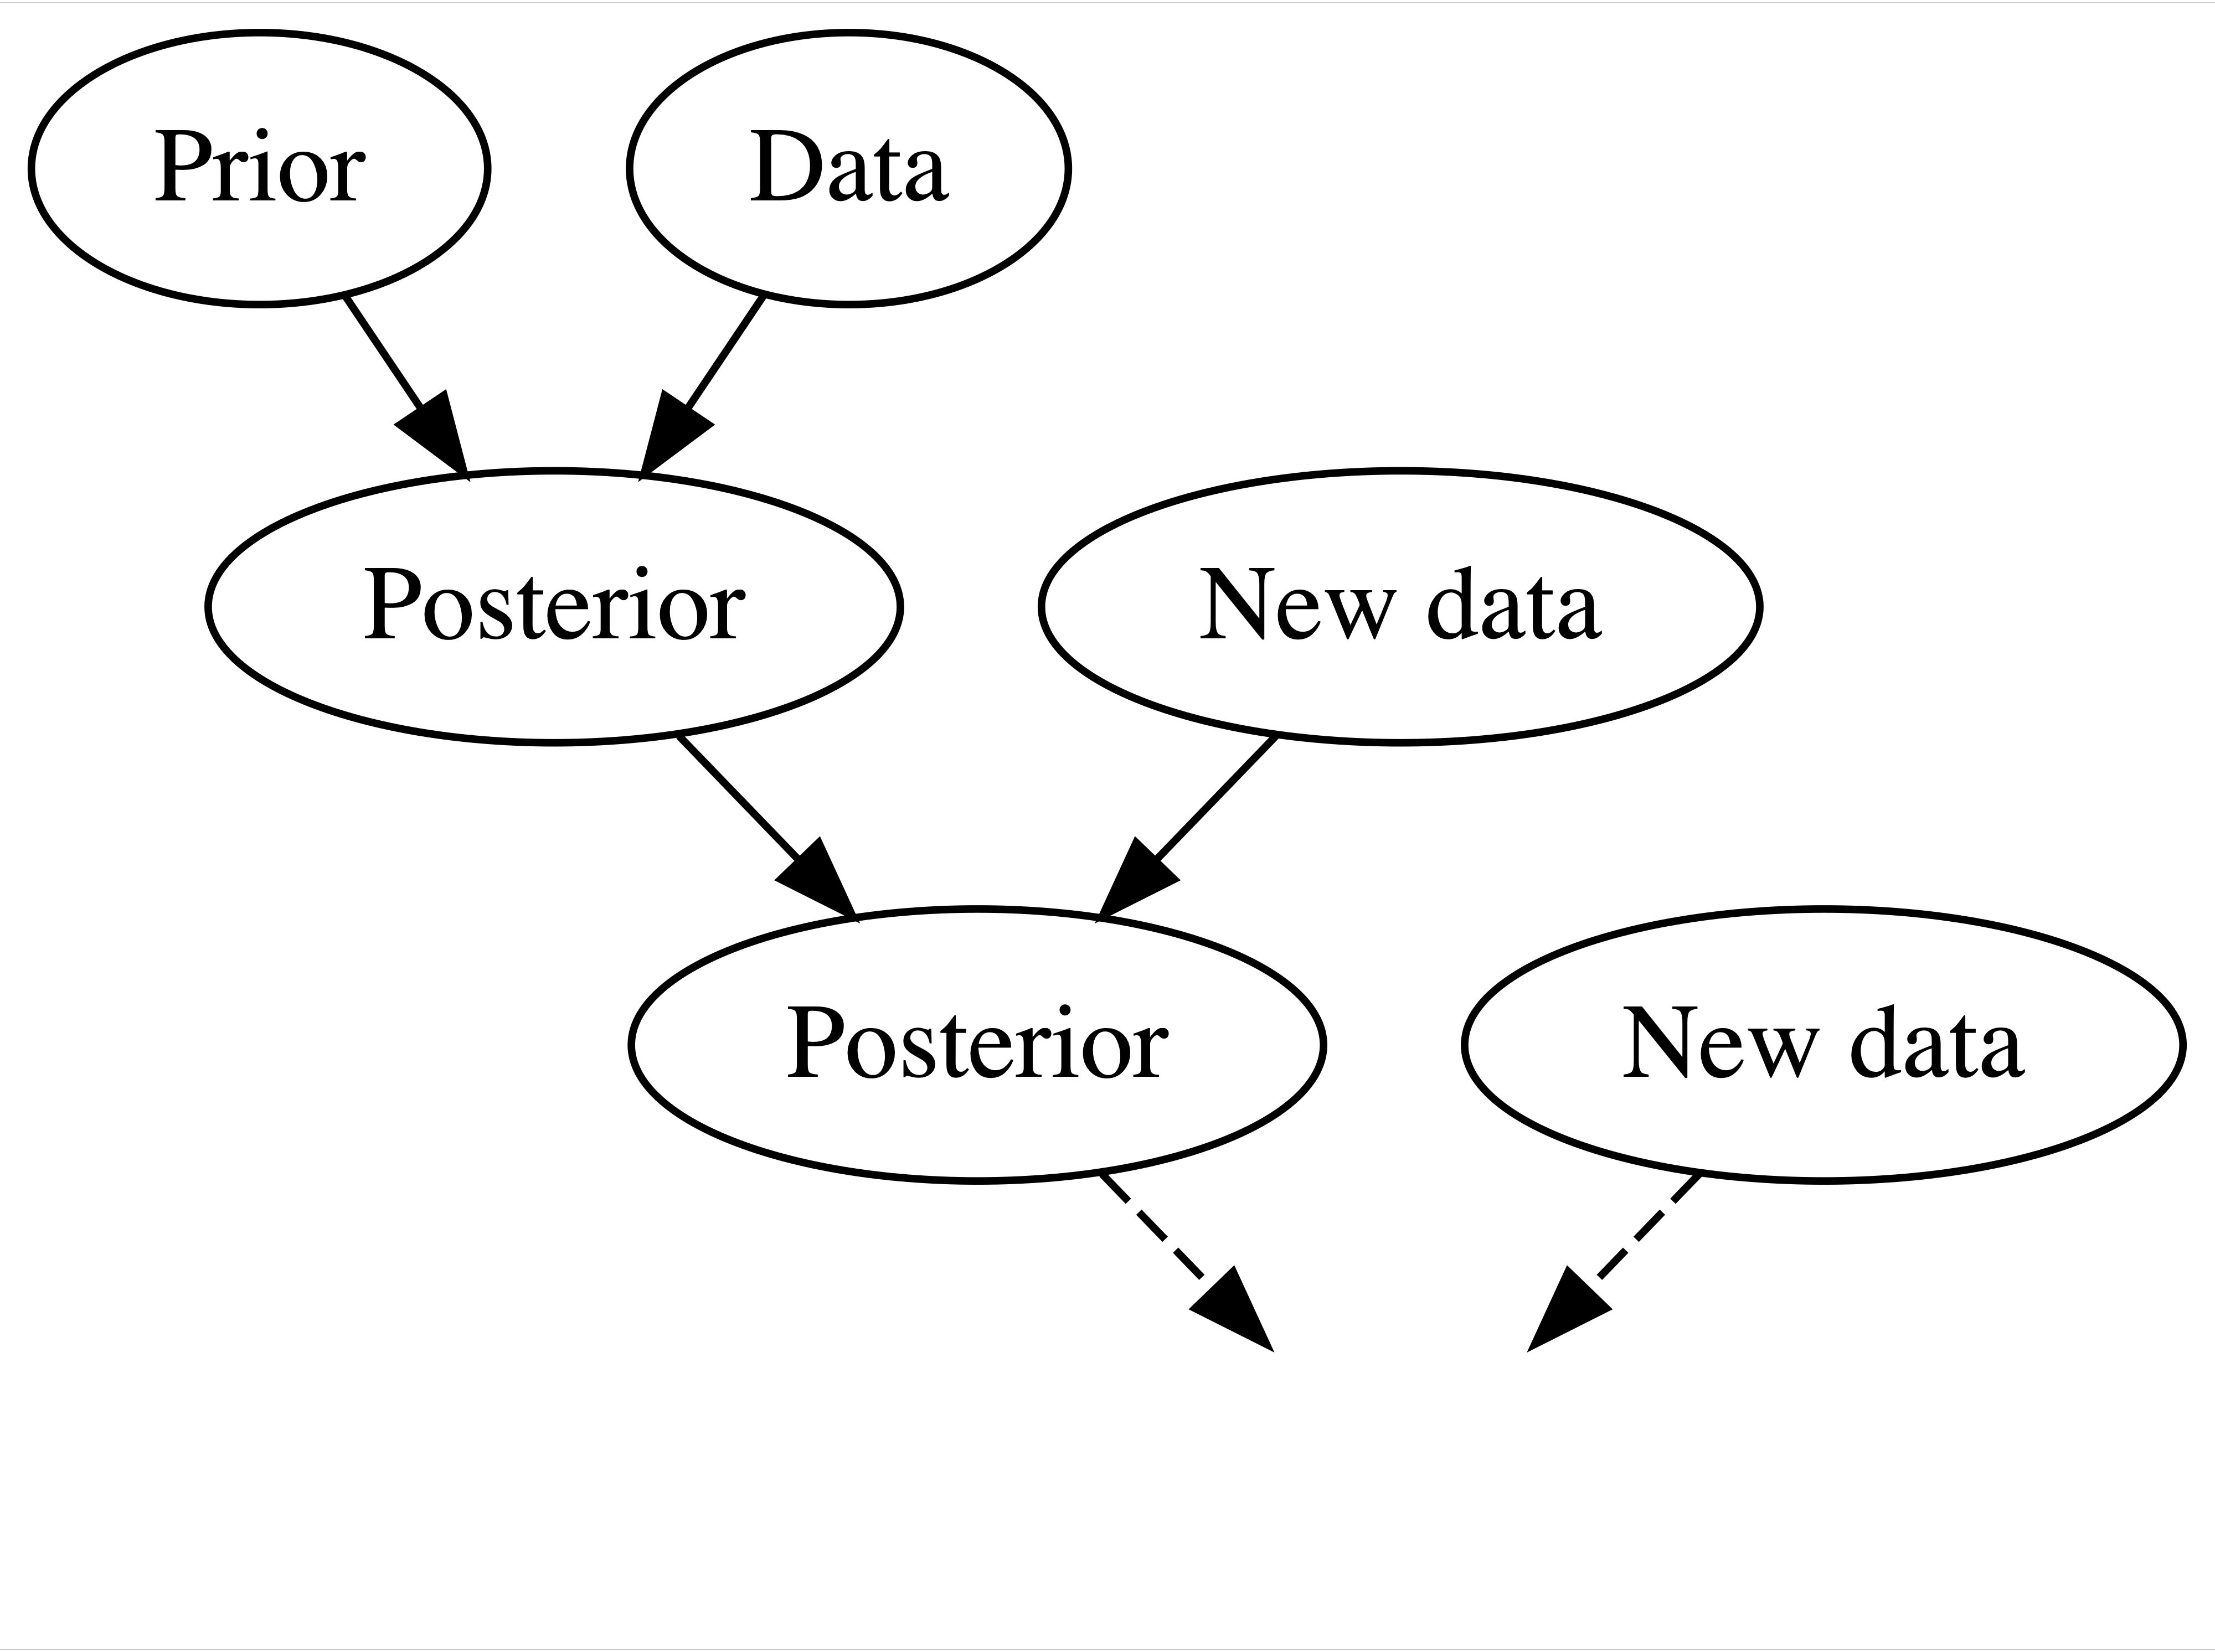 There are two ellipses at the same level. One reads prior and the other reads data. The two ellipses have an arrow pointing to an ellipse at a lower level labeled posterior. The posterior ellipse has another ellipse to its right labeled new data. The posterior and the new data ellipses have an arrow pointing downward to another ellipse labeled posterior. This posterior ellipse has another ellipse to its right labeled new data. The two ellipses with posterior and new data labels point downward with a dashed arrow.